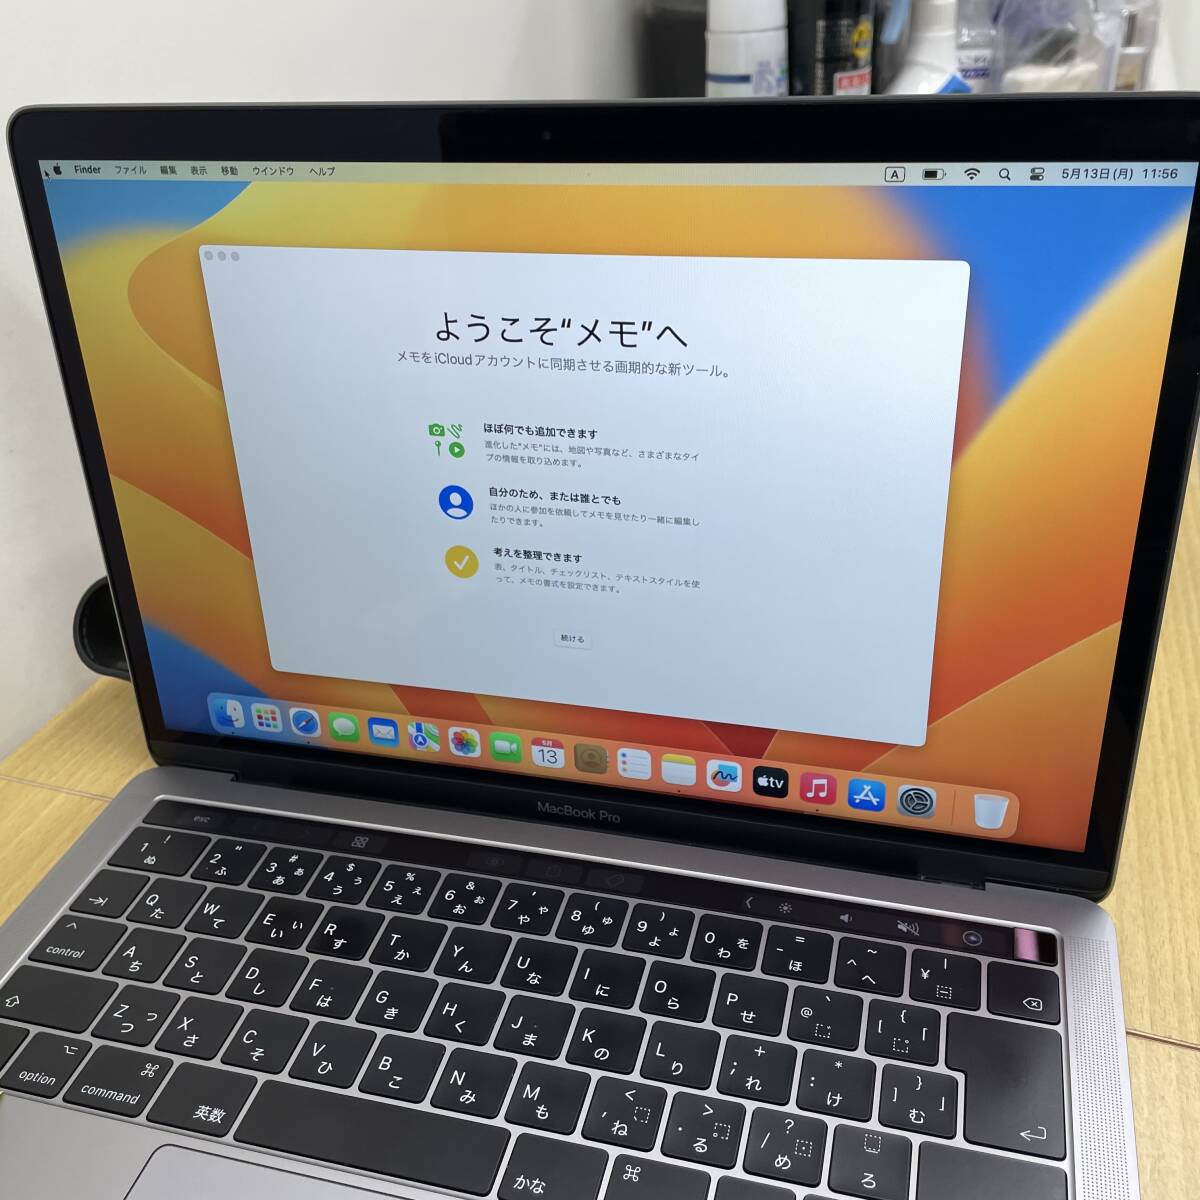 46169-80 ultimate beautiful Apple Macbook Pro 2017 / Core i5 3.1GHz / 16GB / 256GB / 13 -inch silver / A1706, operation verification ending storage 500gb